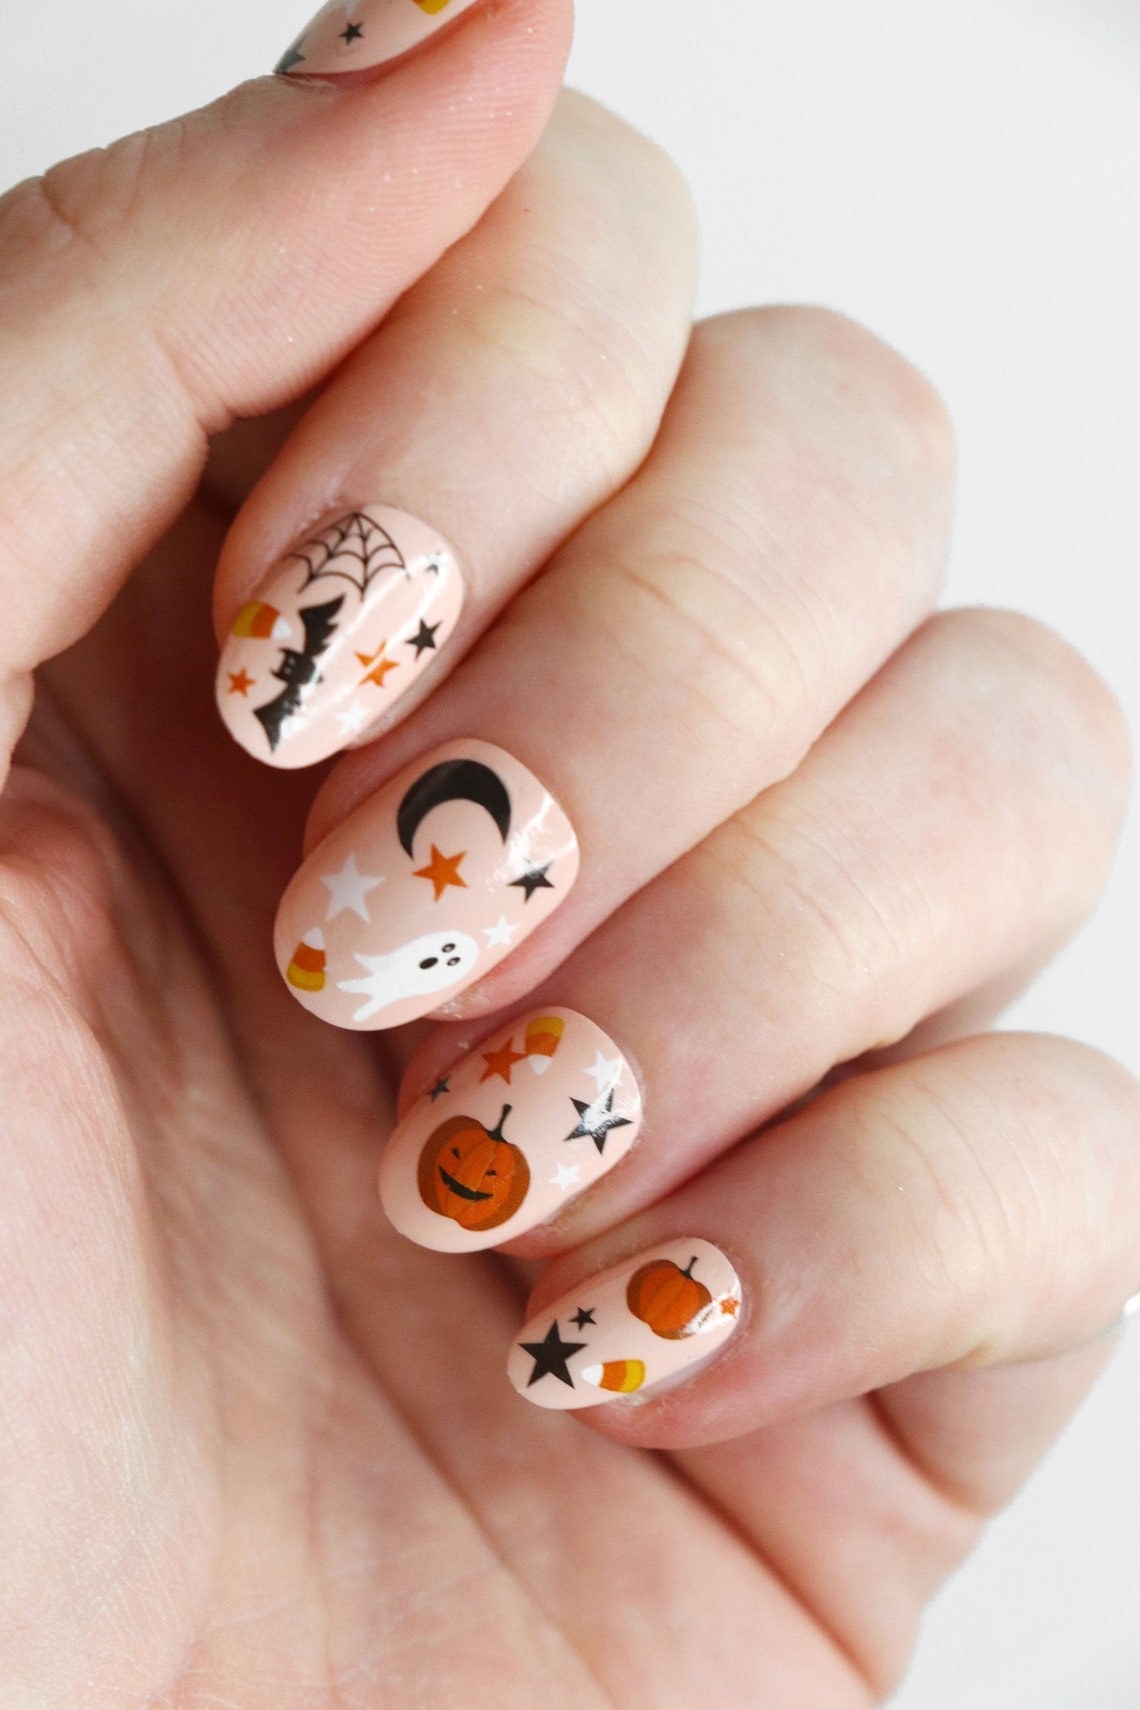 A person&#x27;s hand with short painted fingernails that have little pumpkins stars and ghosts on them